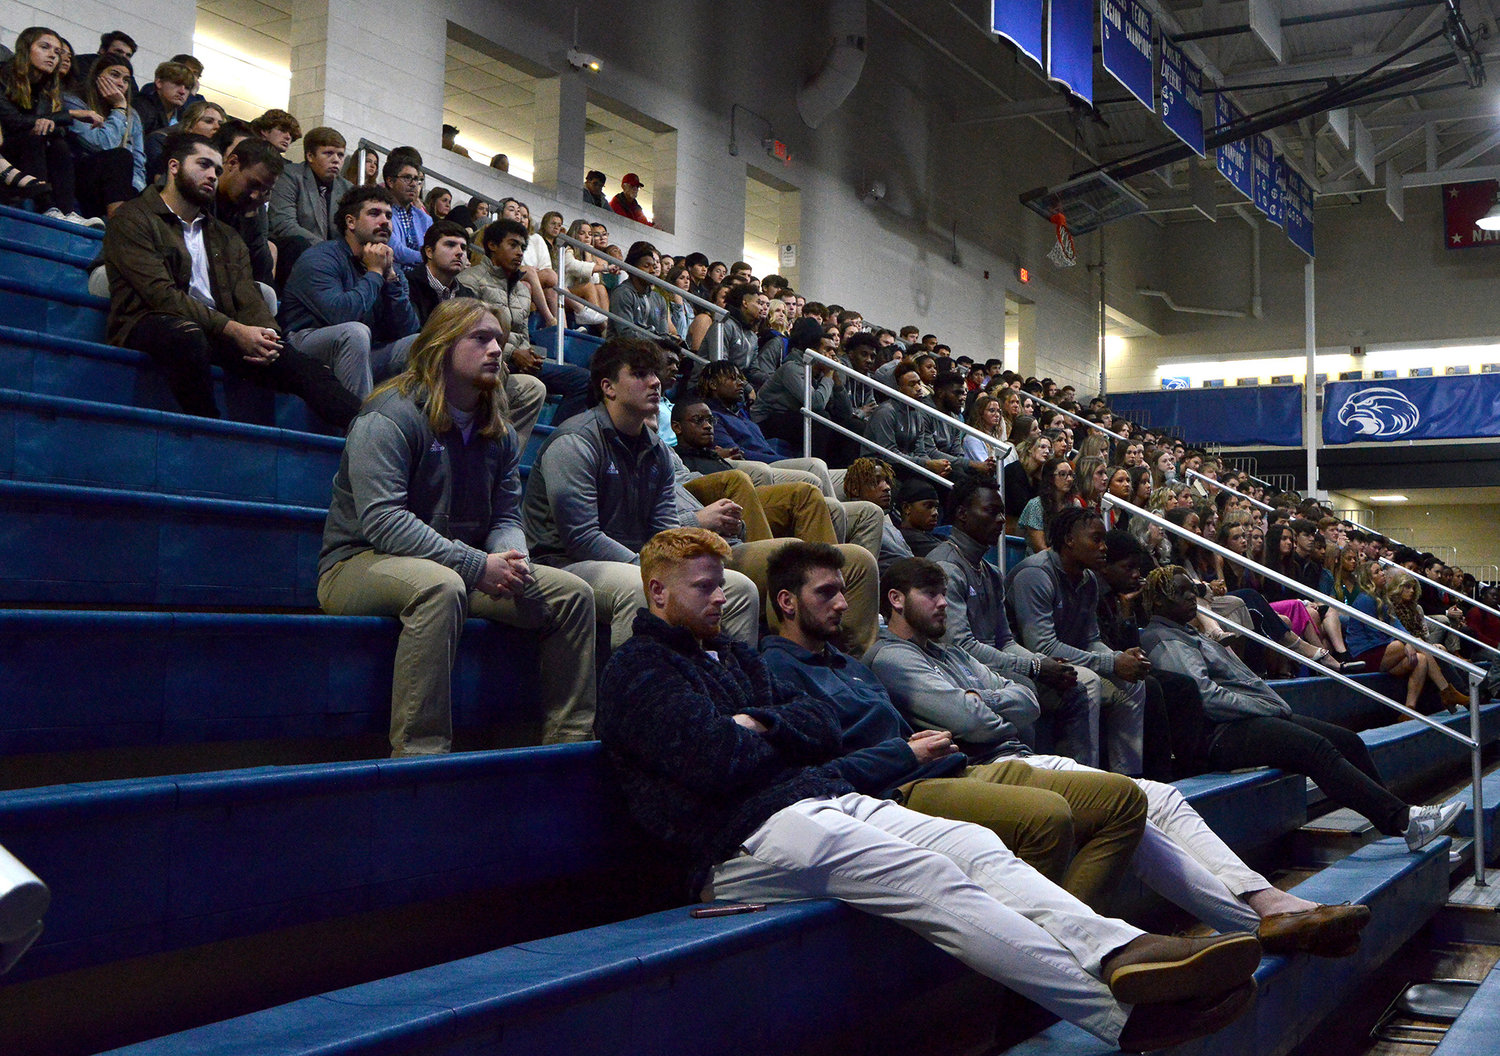 Shorter University student-athletes listen to a message from baseball-superstar-turned-evangelist Darry Strawberry during the President’s Gala in Rome, Ga., Dec. 1, 2022. (Index/Henry Durand)